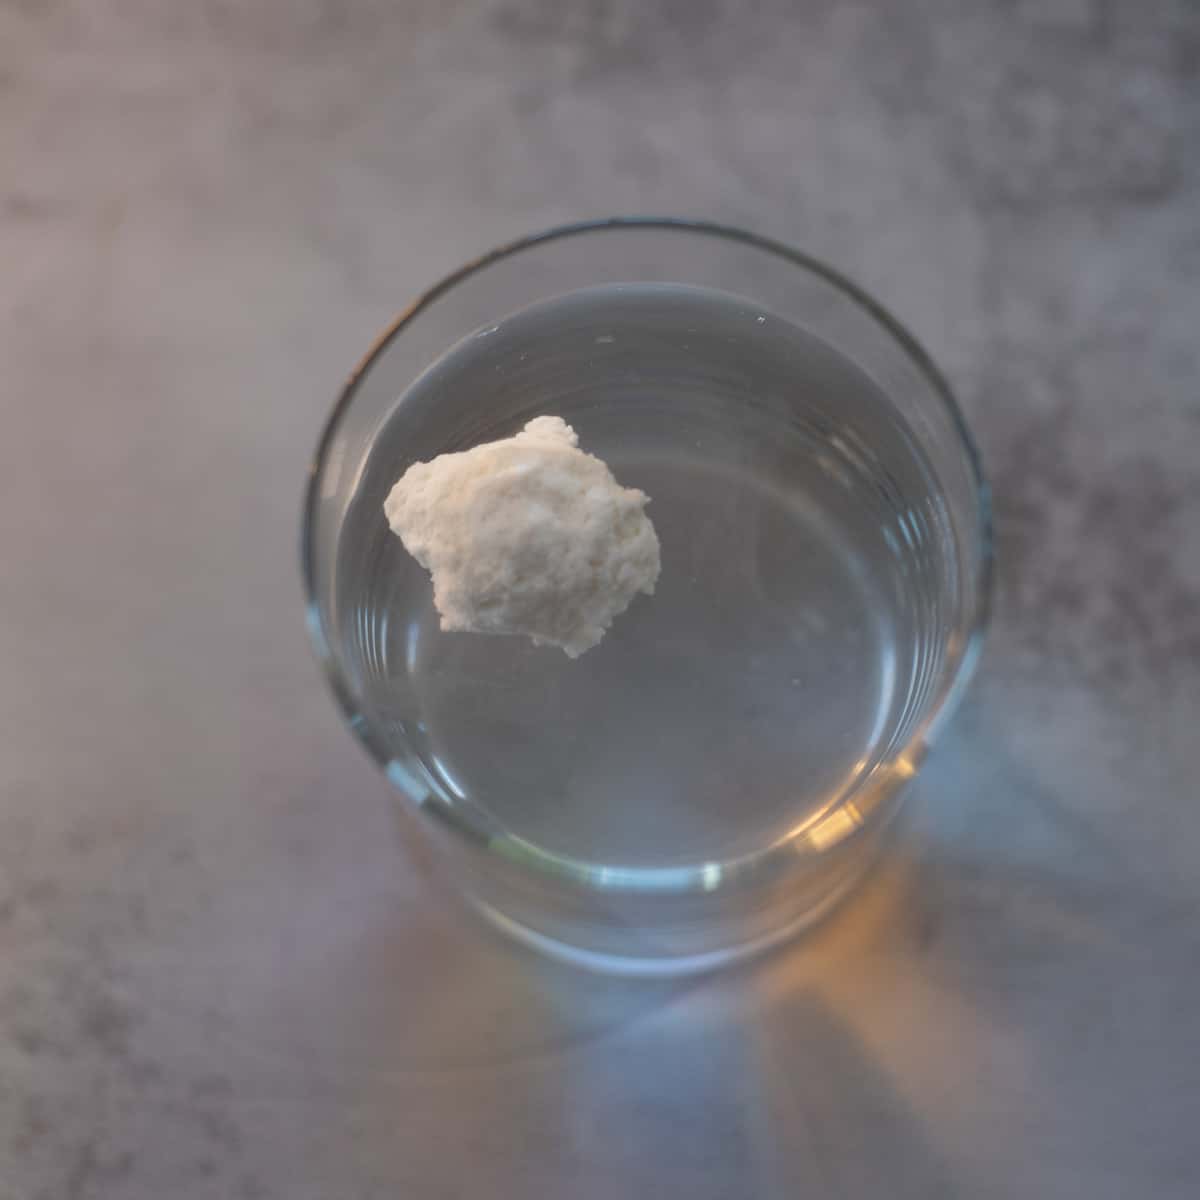 a blob of sourdough starter floating in a glass of water